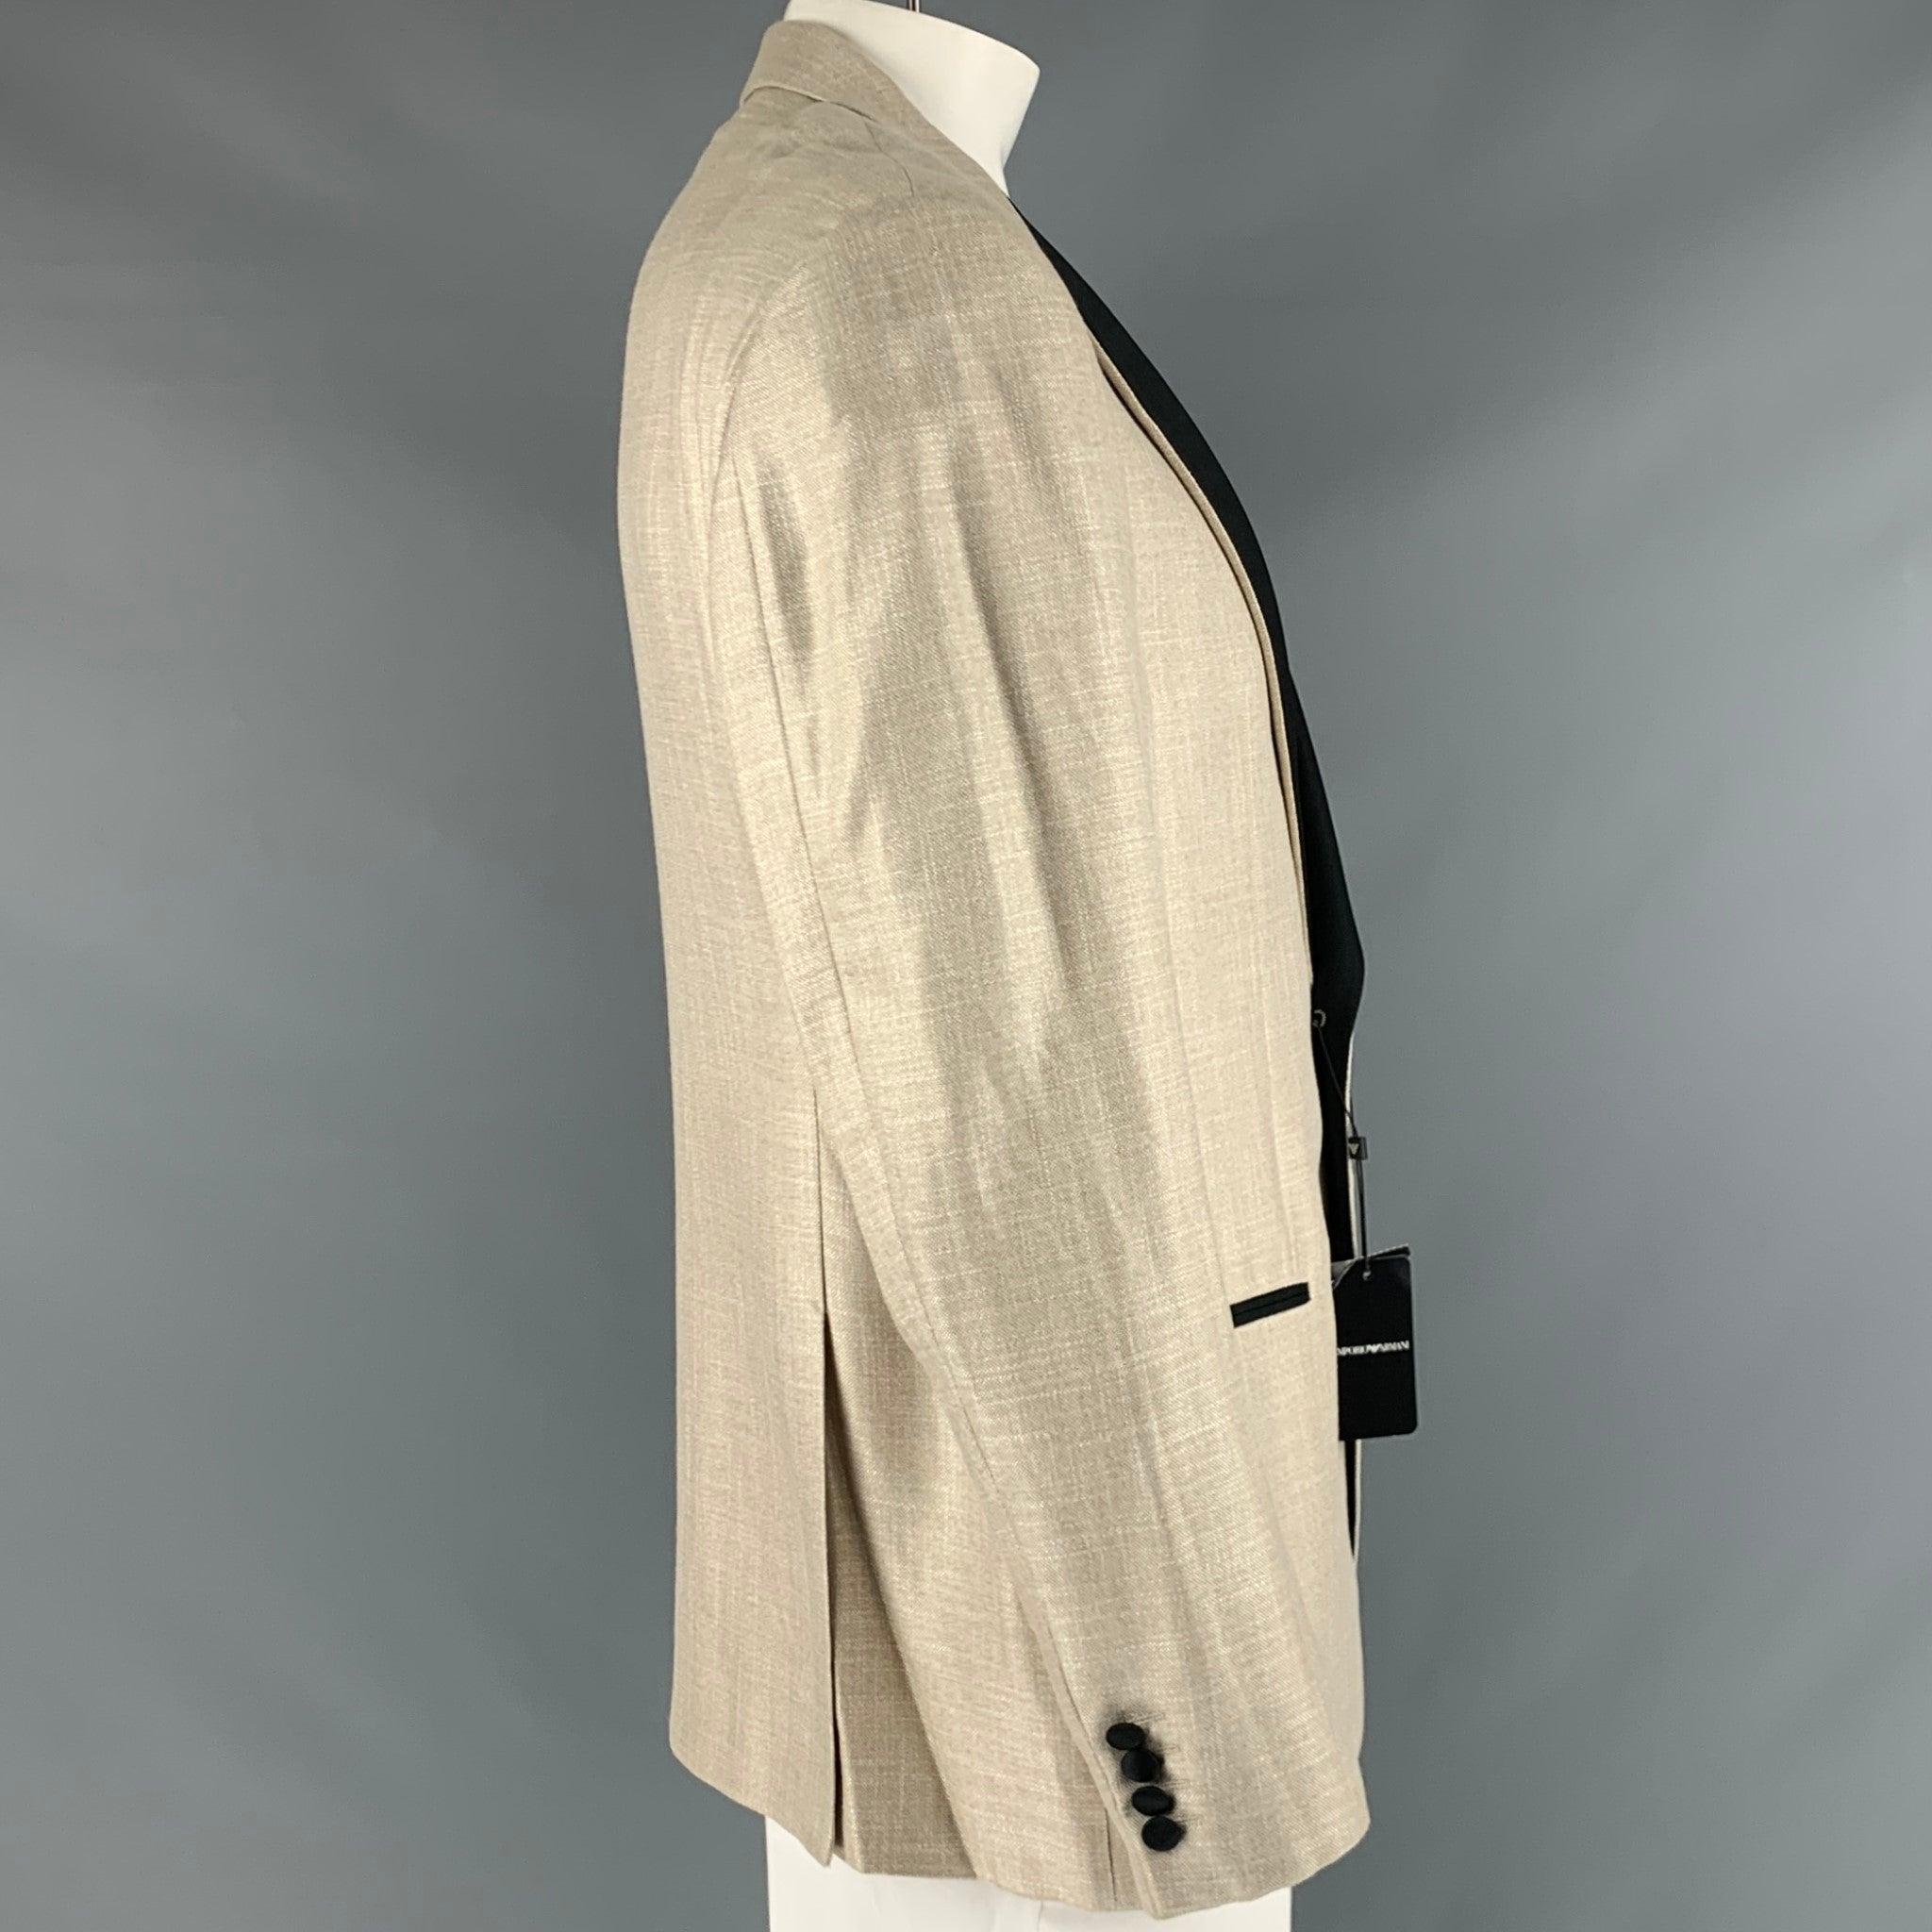 EMPORIO ARMANI sport coat
in a creamy oatmeal viscose blend fabric, featuring contrast black peak lapel, three pockets, and a single button closure. Made in Bulgaria.New with Tags. 

Marked:   L 

Measurements: 
 
Shoulder: 19 inches Chest: 44